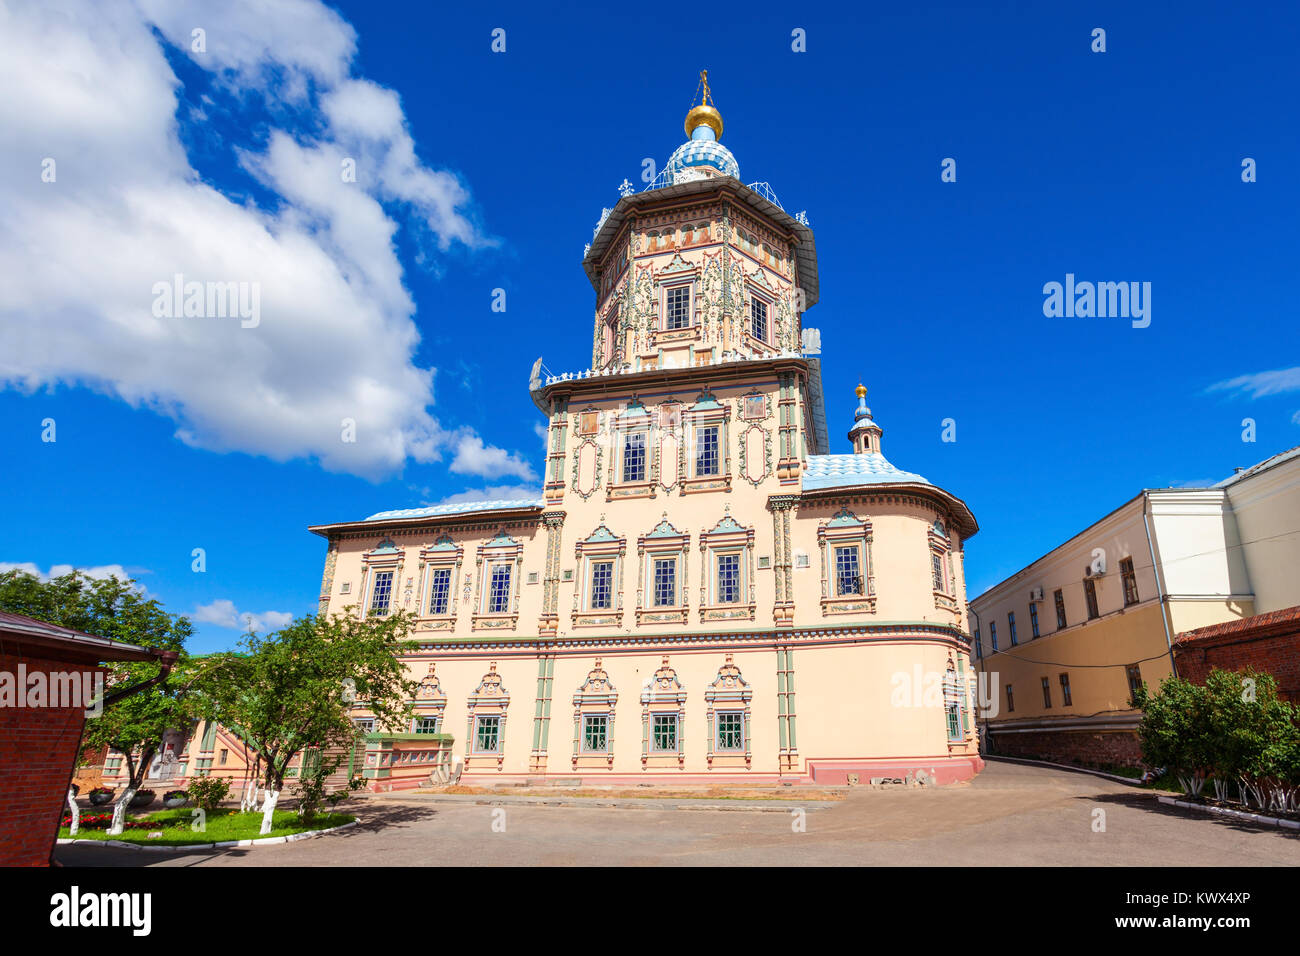 Cathedral of the Saint Apostles Peter and Paul (Petropavlovsky Cathedral) is a Russian Orthodox church in Kazan, Tatarstan republic of Russia. Stock Photo